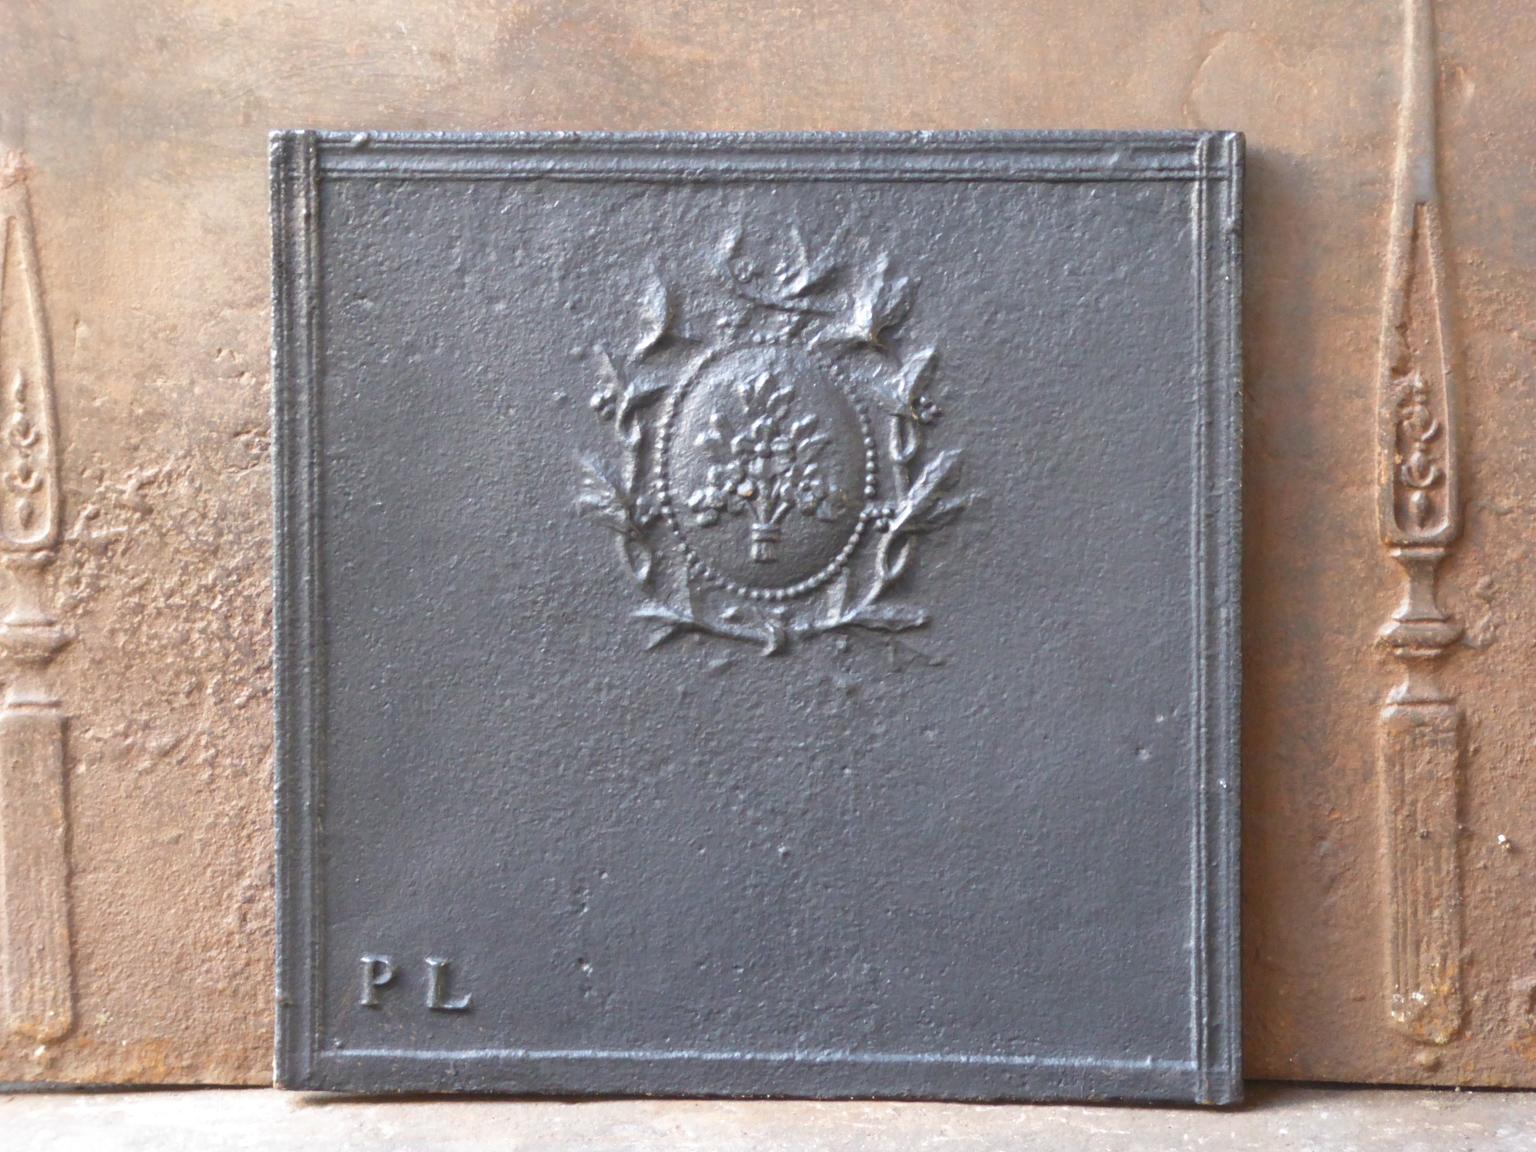 19th century French neoclassical fireback with a floral decoration (which replaced the royal crown after the French revolution). 

The fireback is made of cast iron and has a natural black / pewter patina. The fireback is in a good condition and